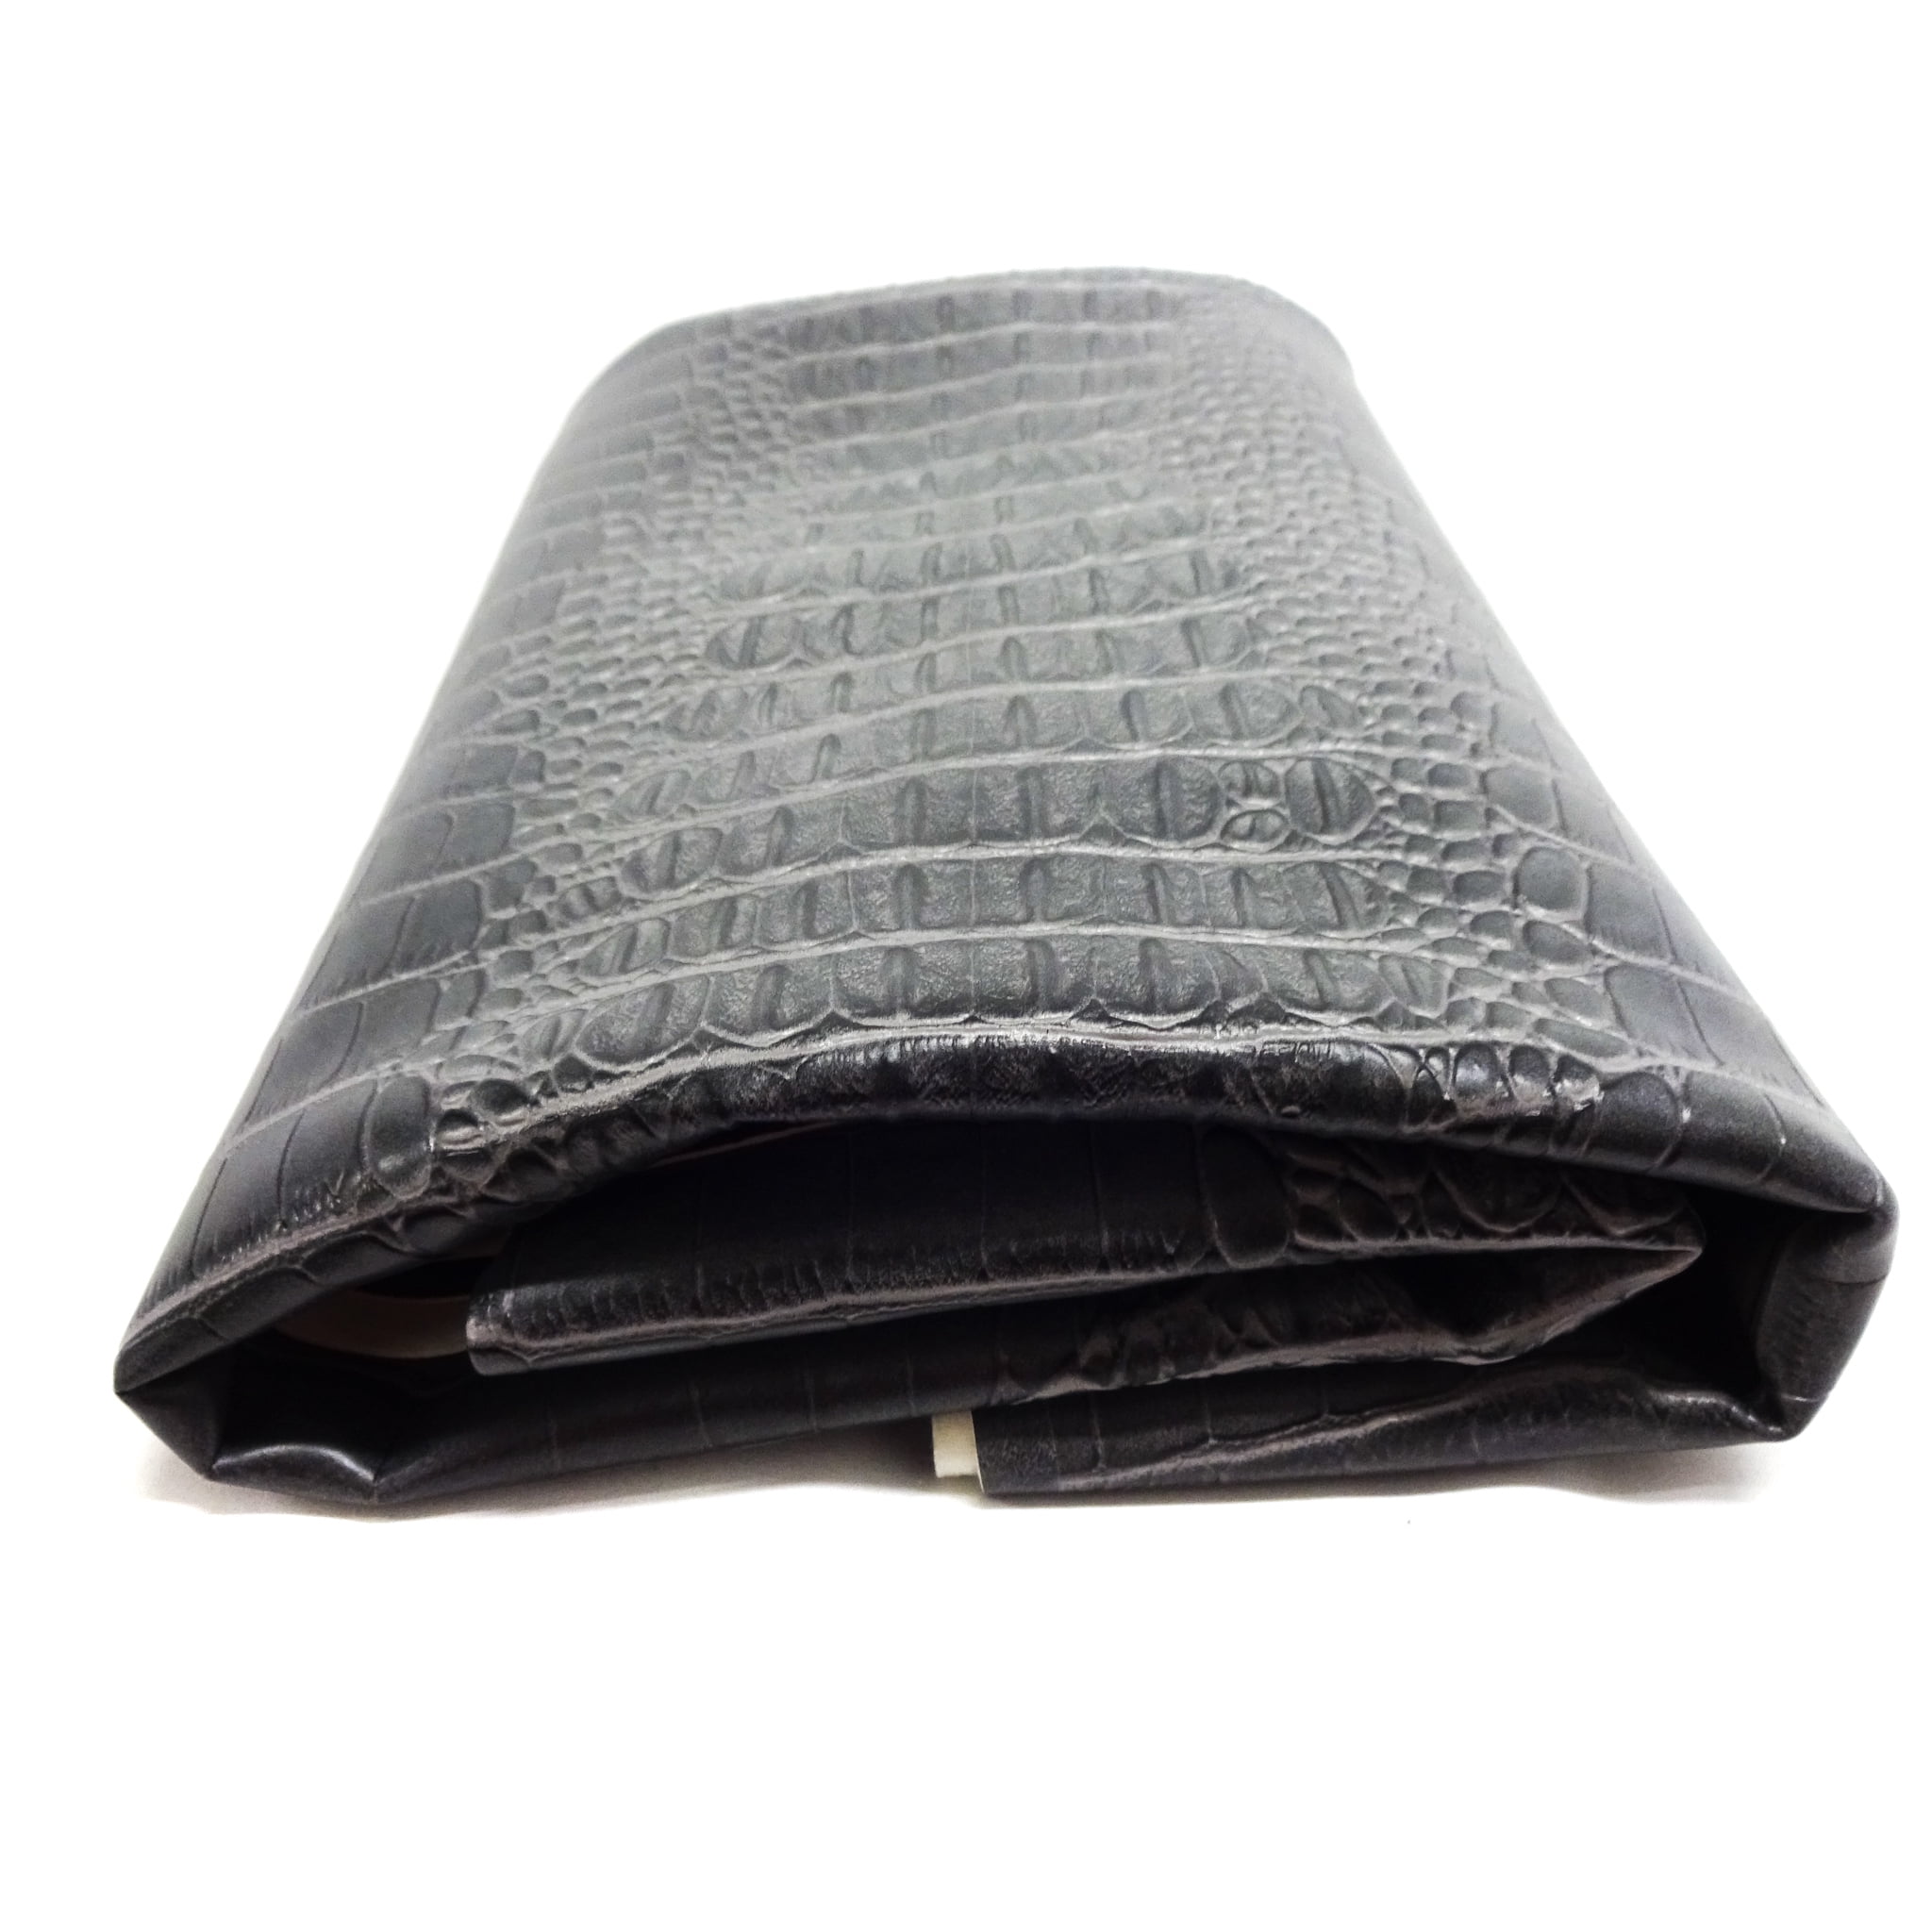 Shason Textile Faux Leather Crocodile Print Upholstery Fabric, Gray, Available in Multiple Colors, Size: 36 inch x 52 inch